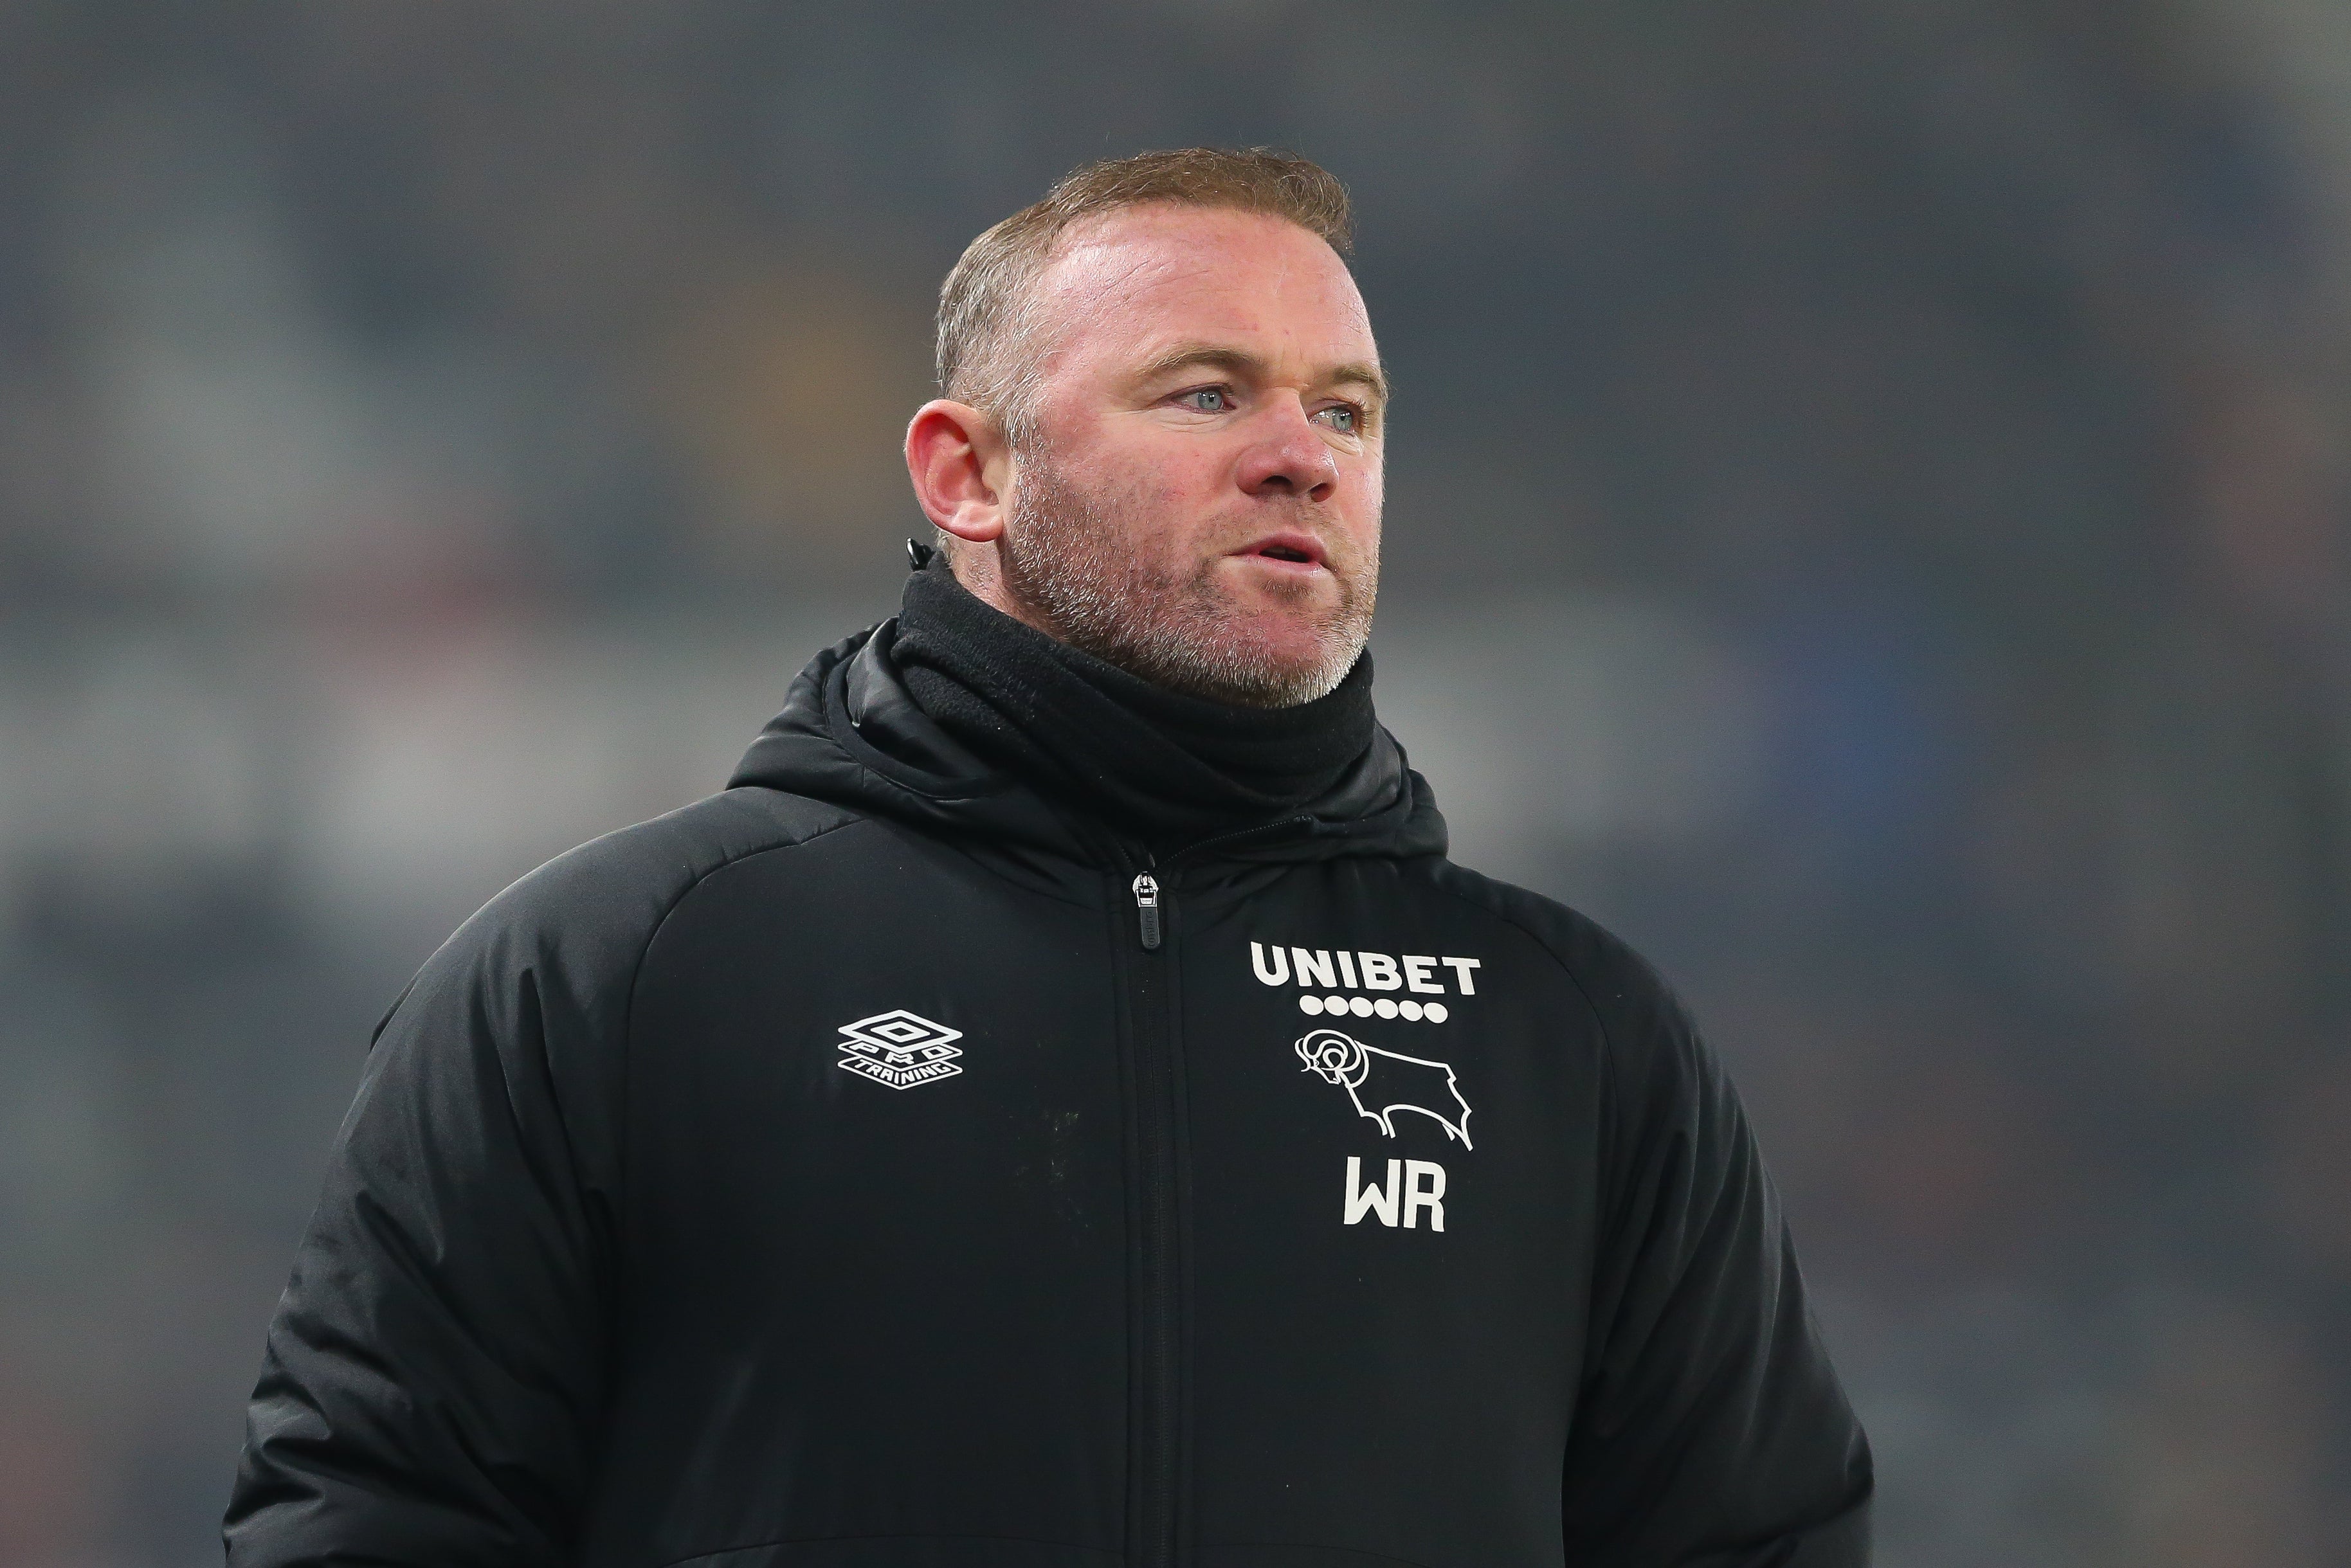 Wayne Rooney is flattered by speculation linking him with the vacant manager’s job at Everton but says his focus is on Derby